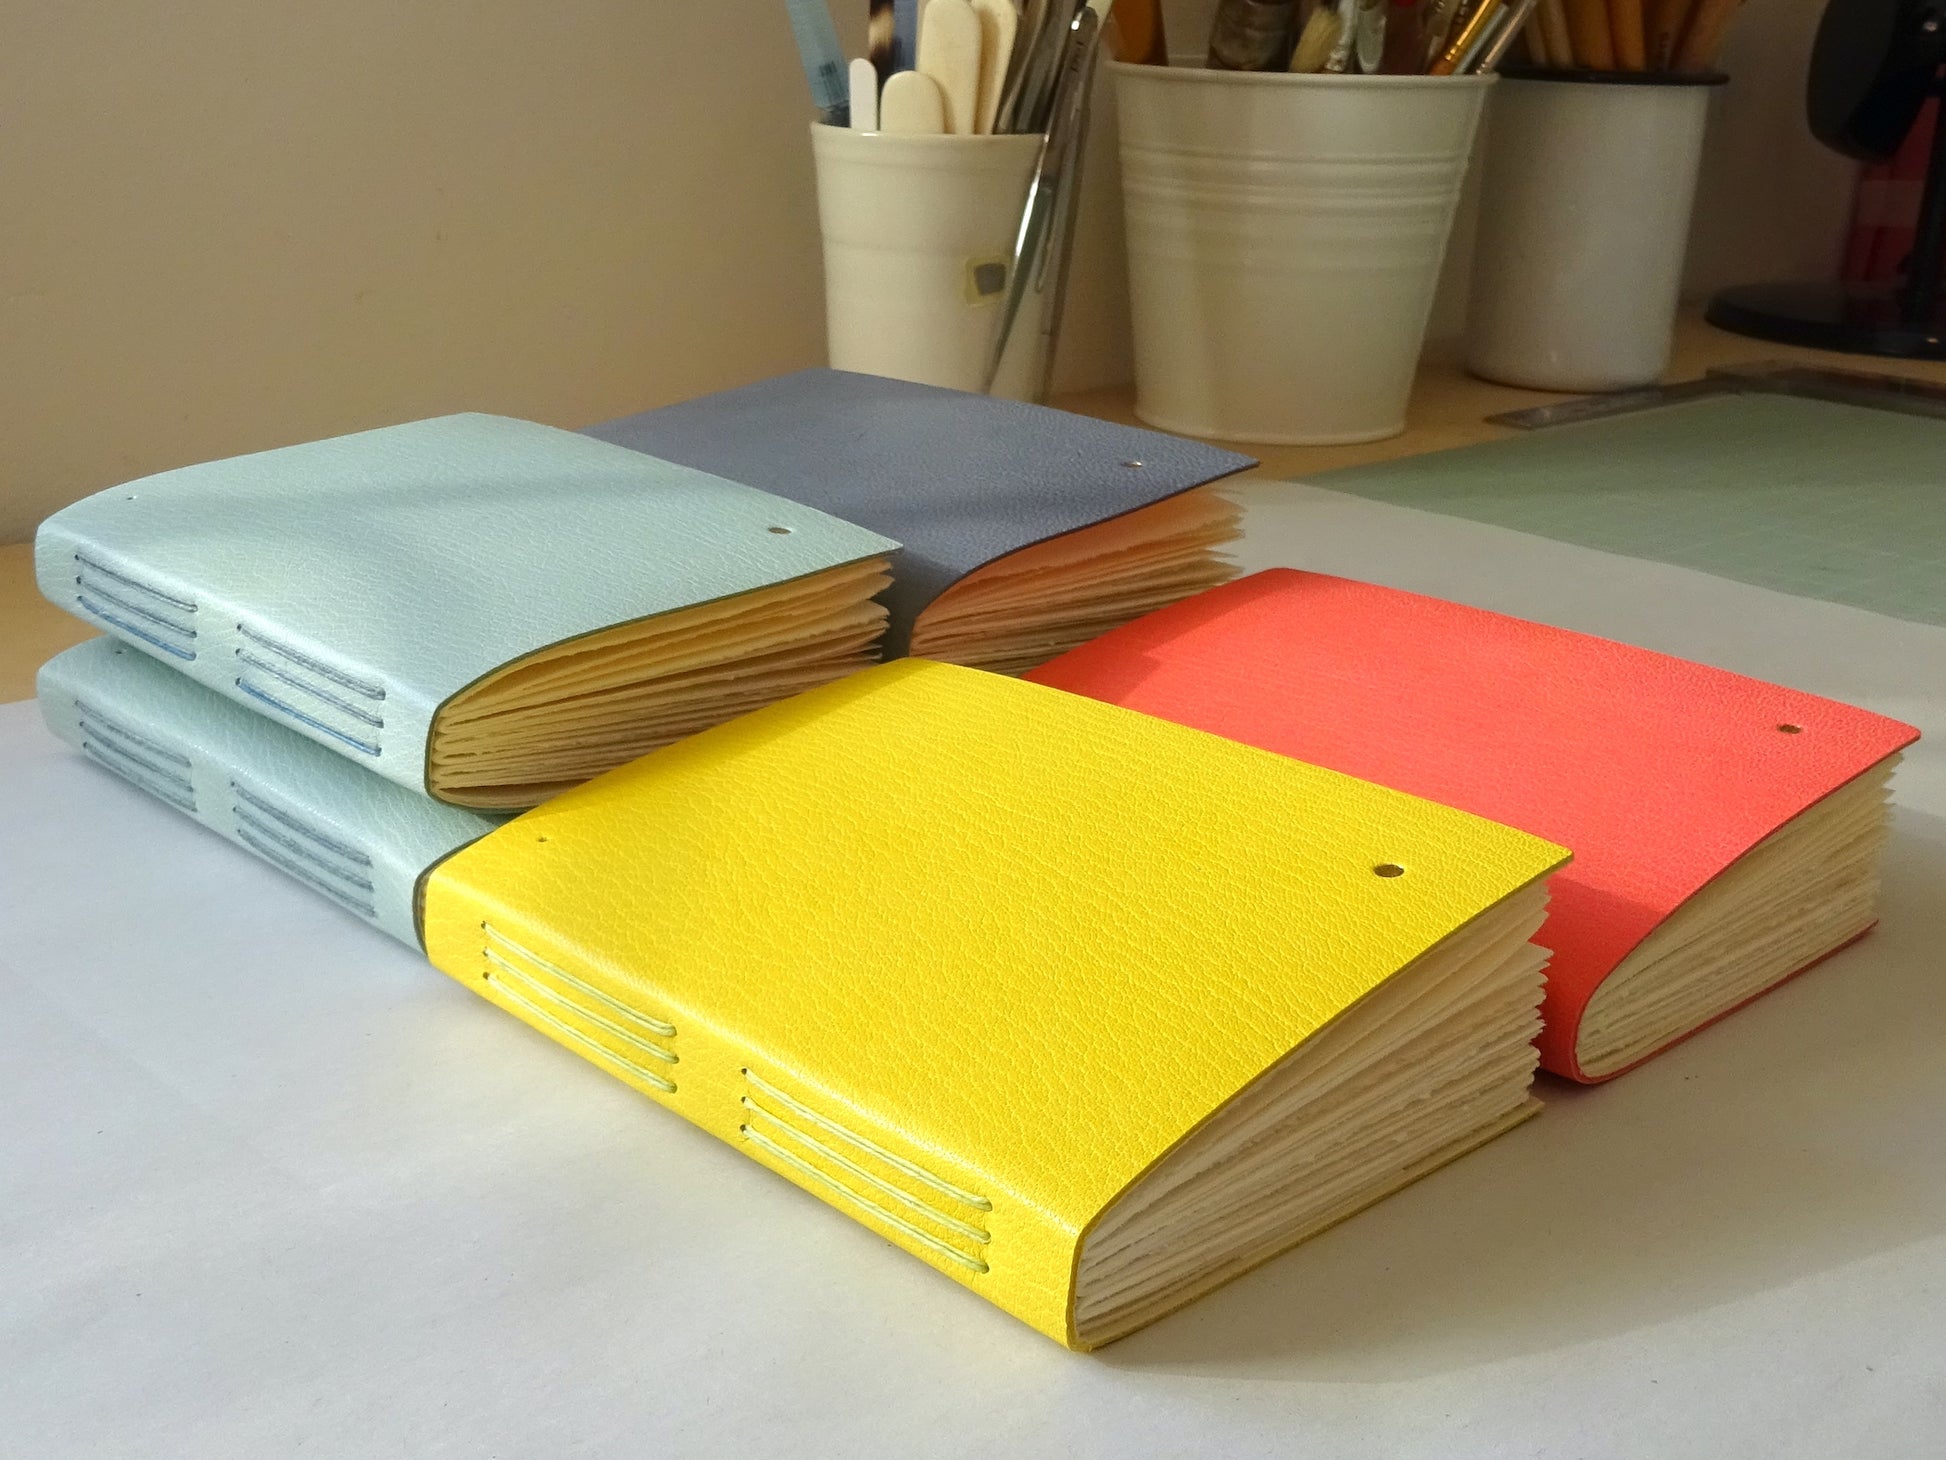 Leather Notebooks with Gold Dots